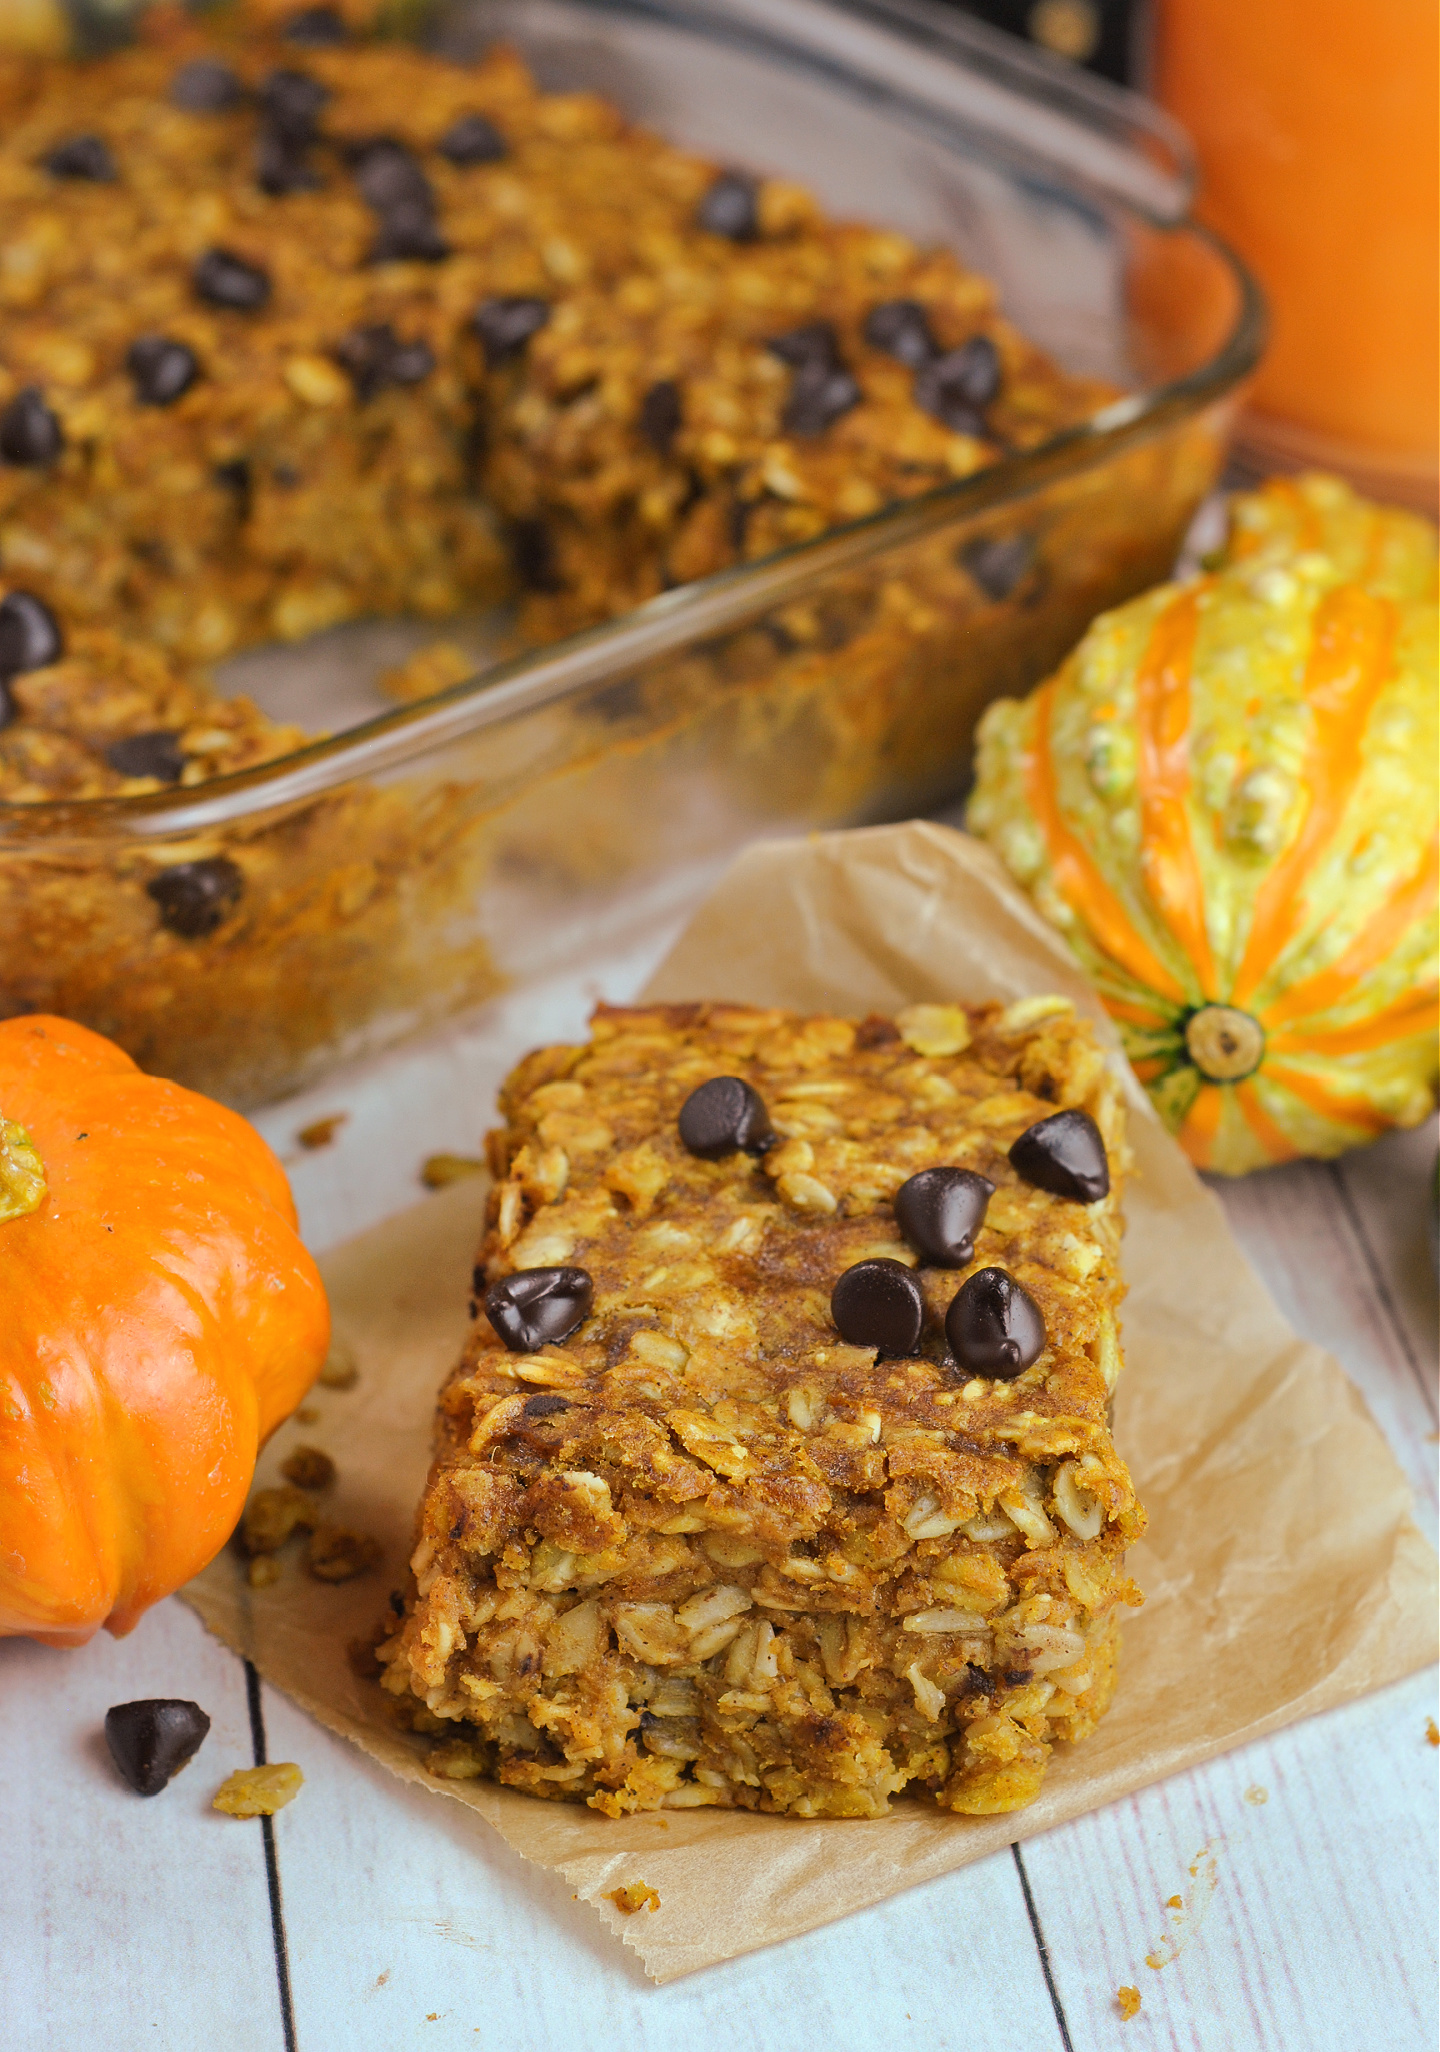 Pumpkin-Oat Bars with Chocolate Chips via @preventionrd